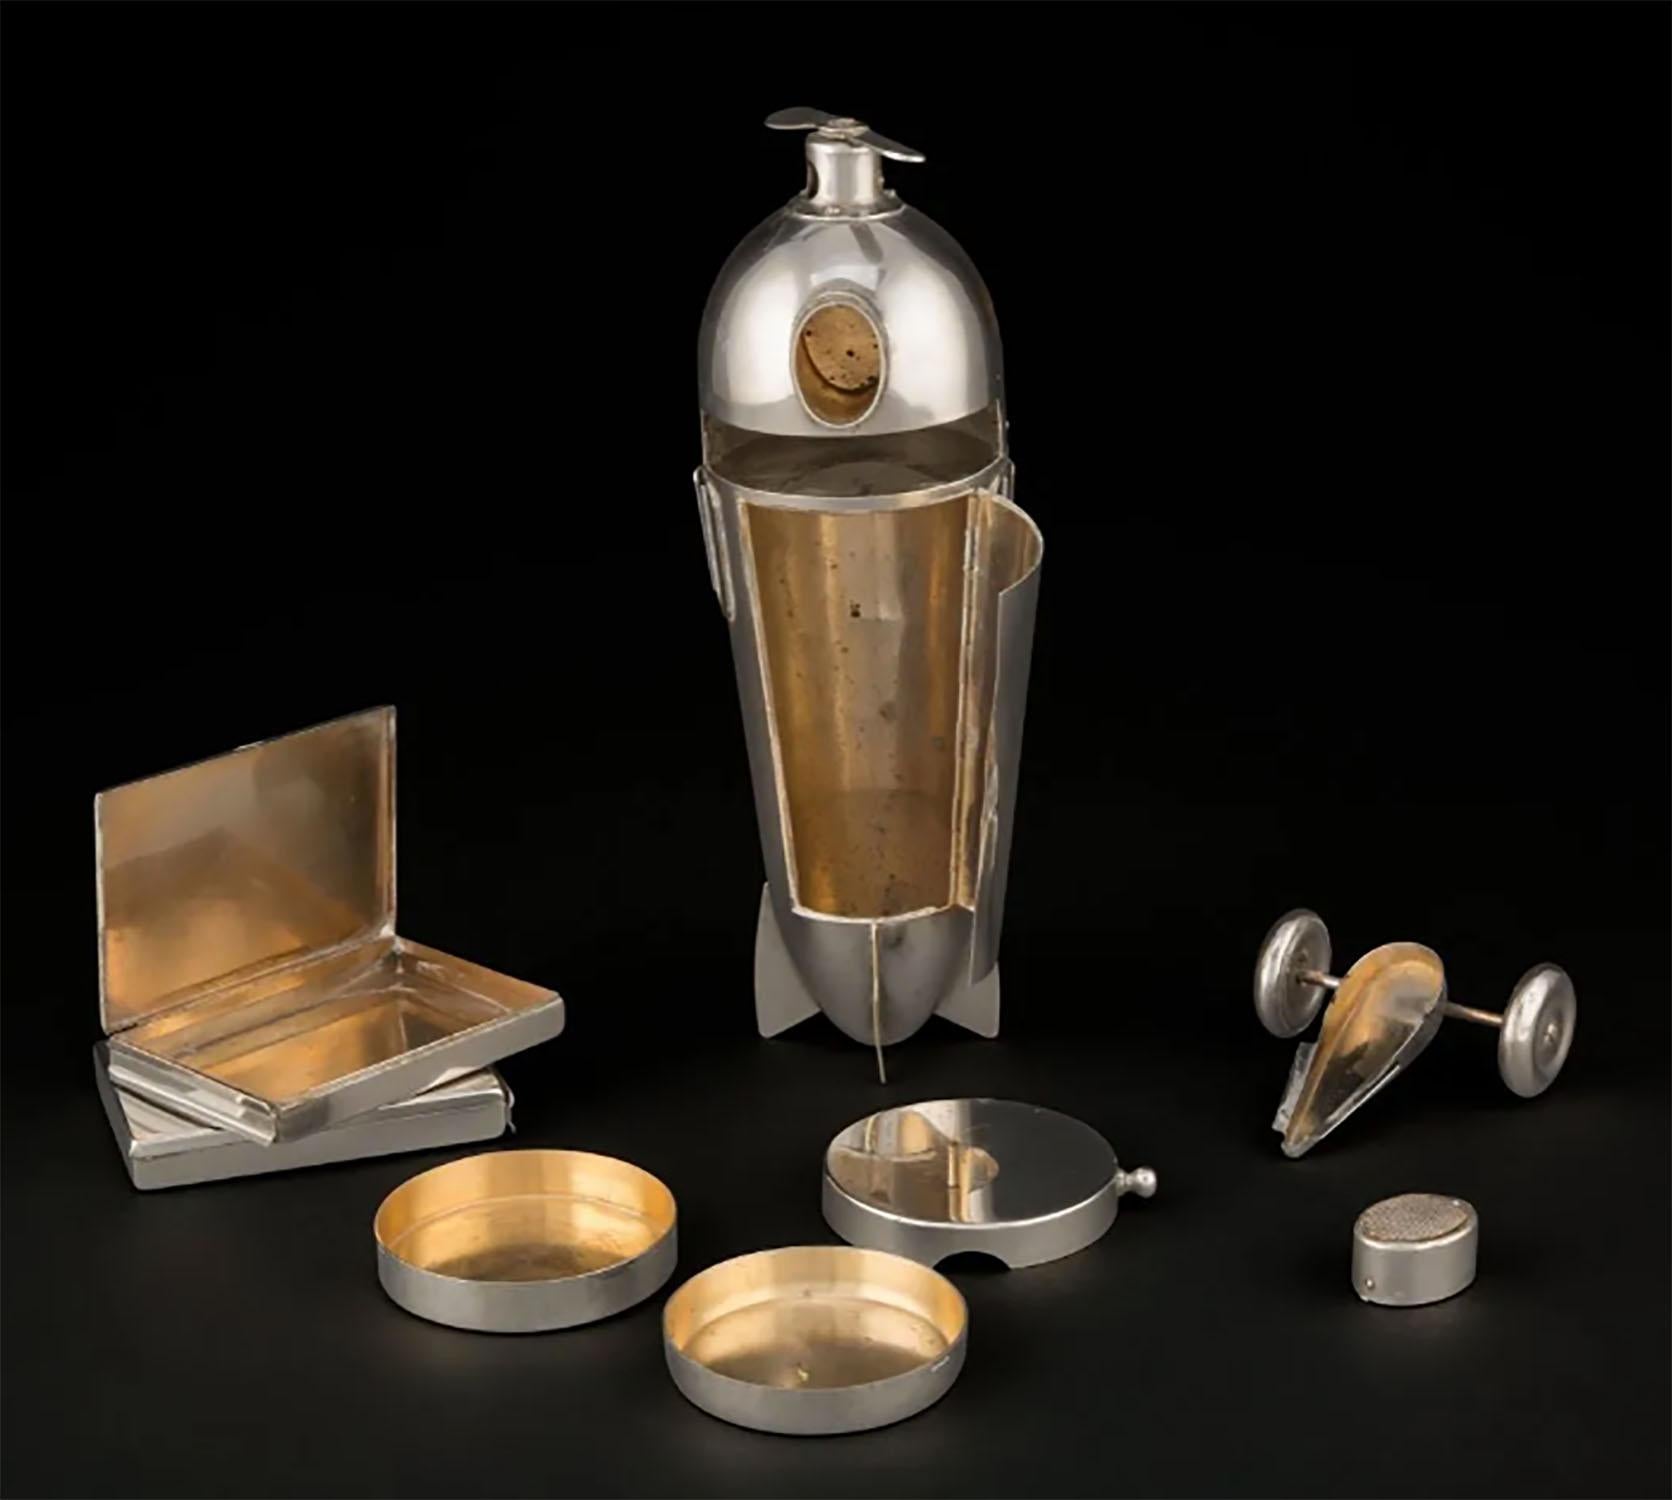 Art Deco Airplane Smoker's Set by J.A. Henckels 1930s For Sale 8